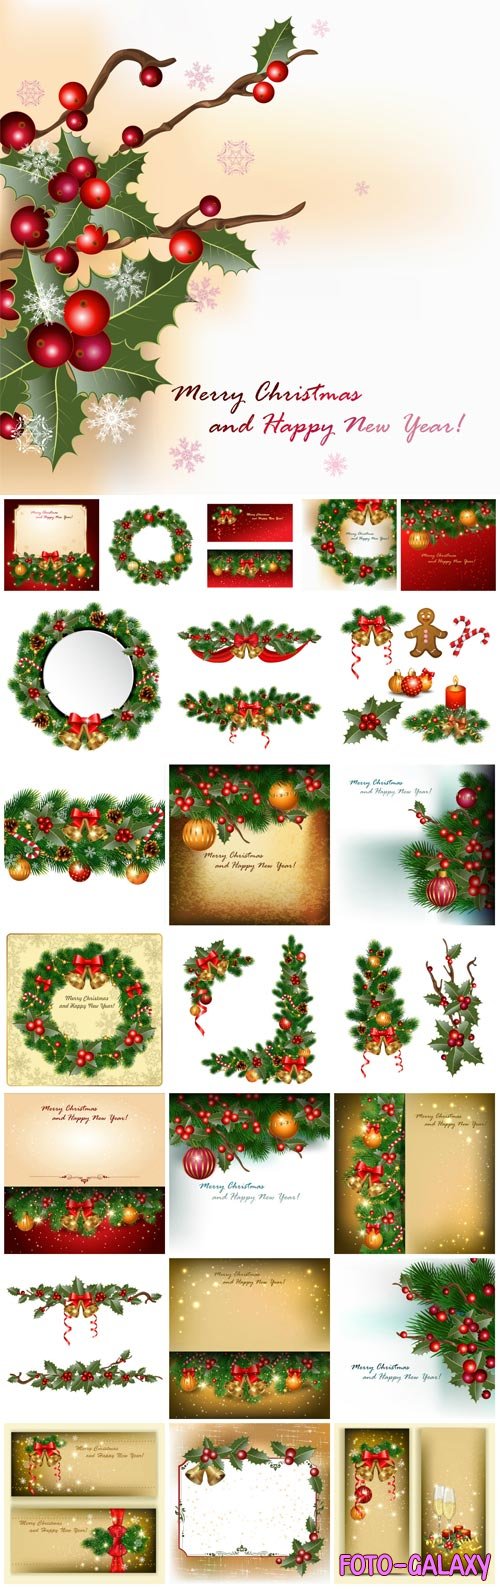 New Year and Christmas illustrations in vector 41